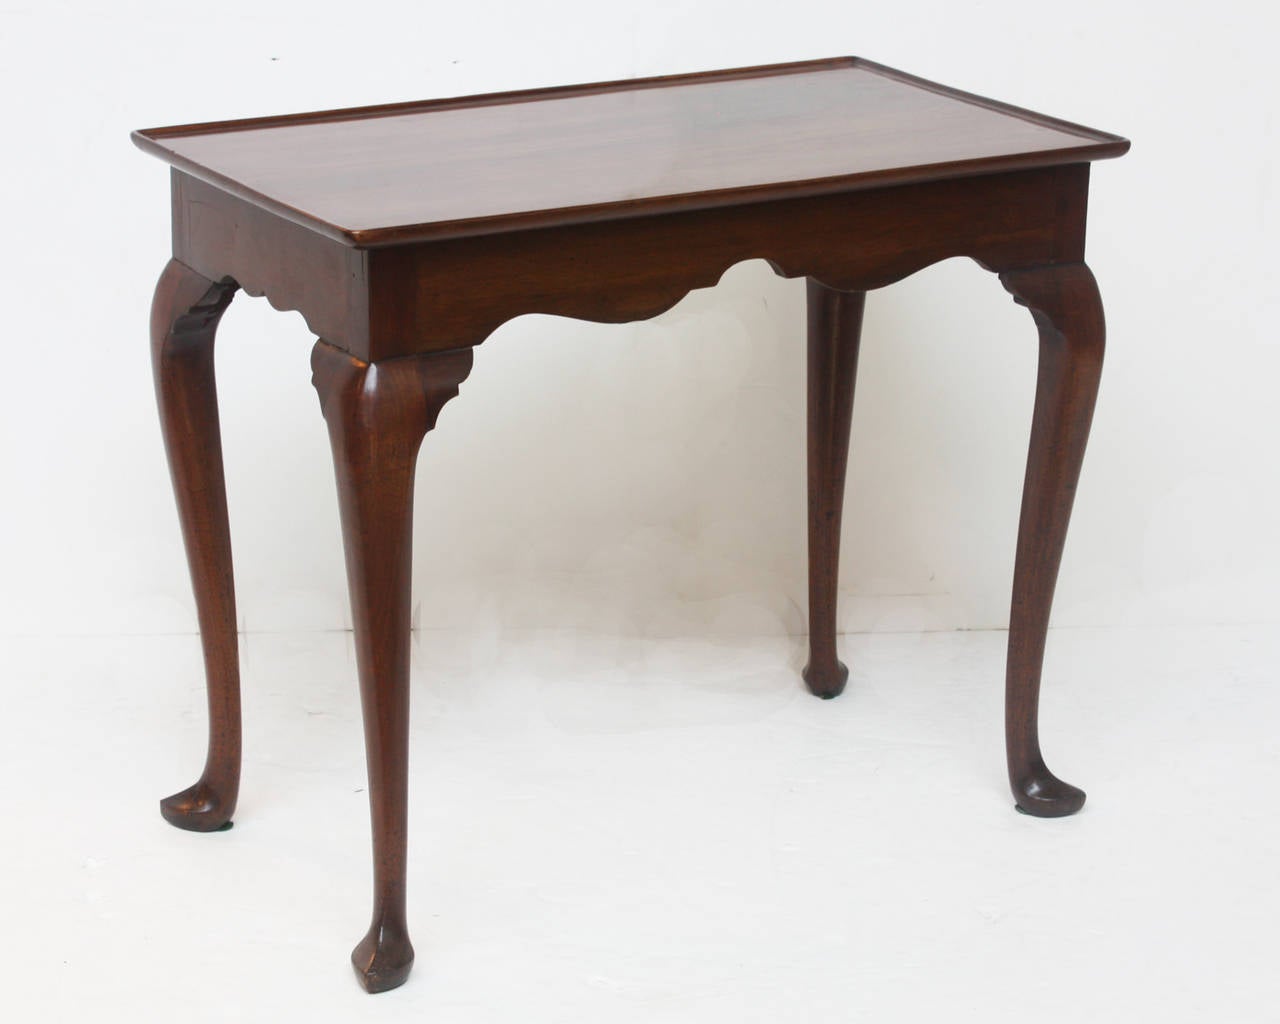 A Queen Anne Chippendale or Georgian mahogany tea table (rectangular) with scalloped apron, shaped cabriole legs and slipper feet